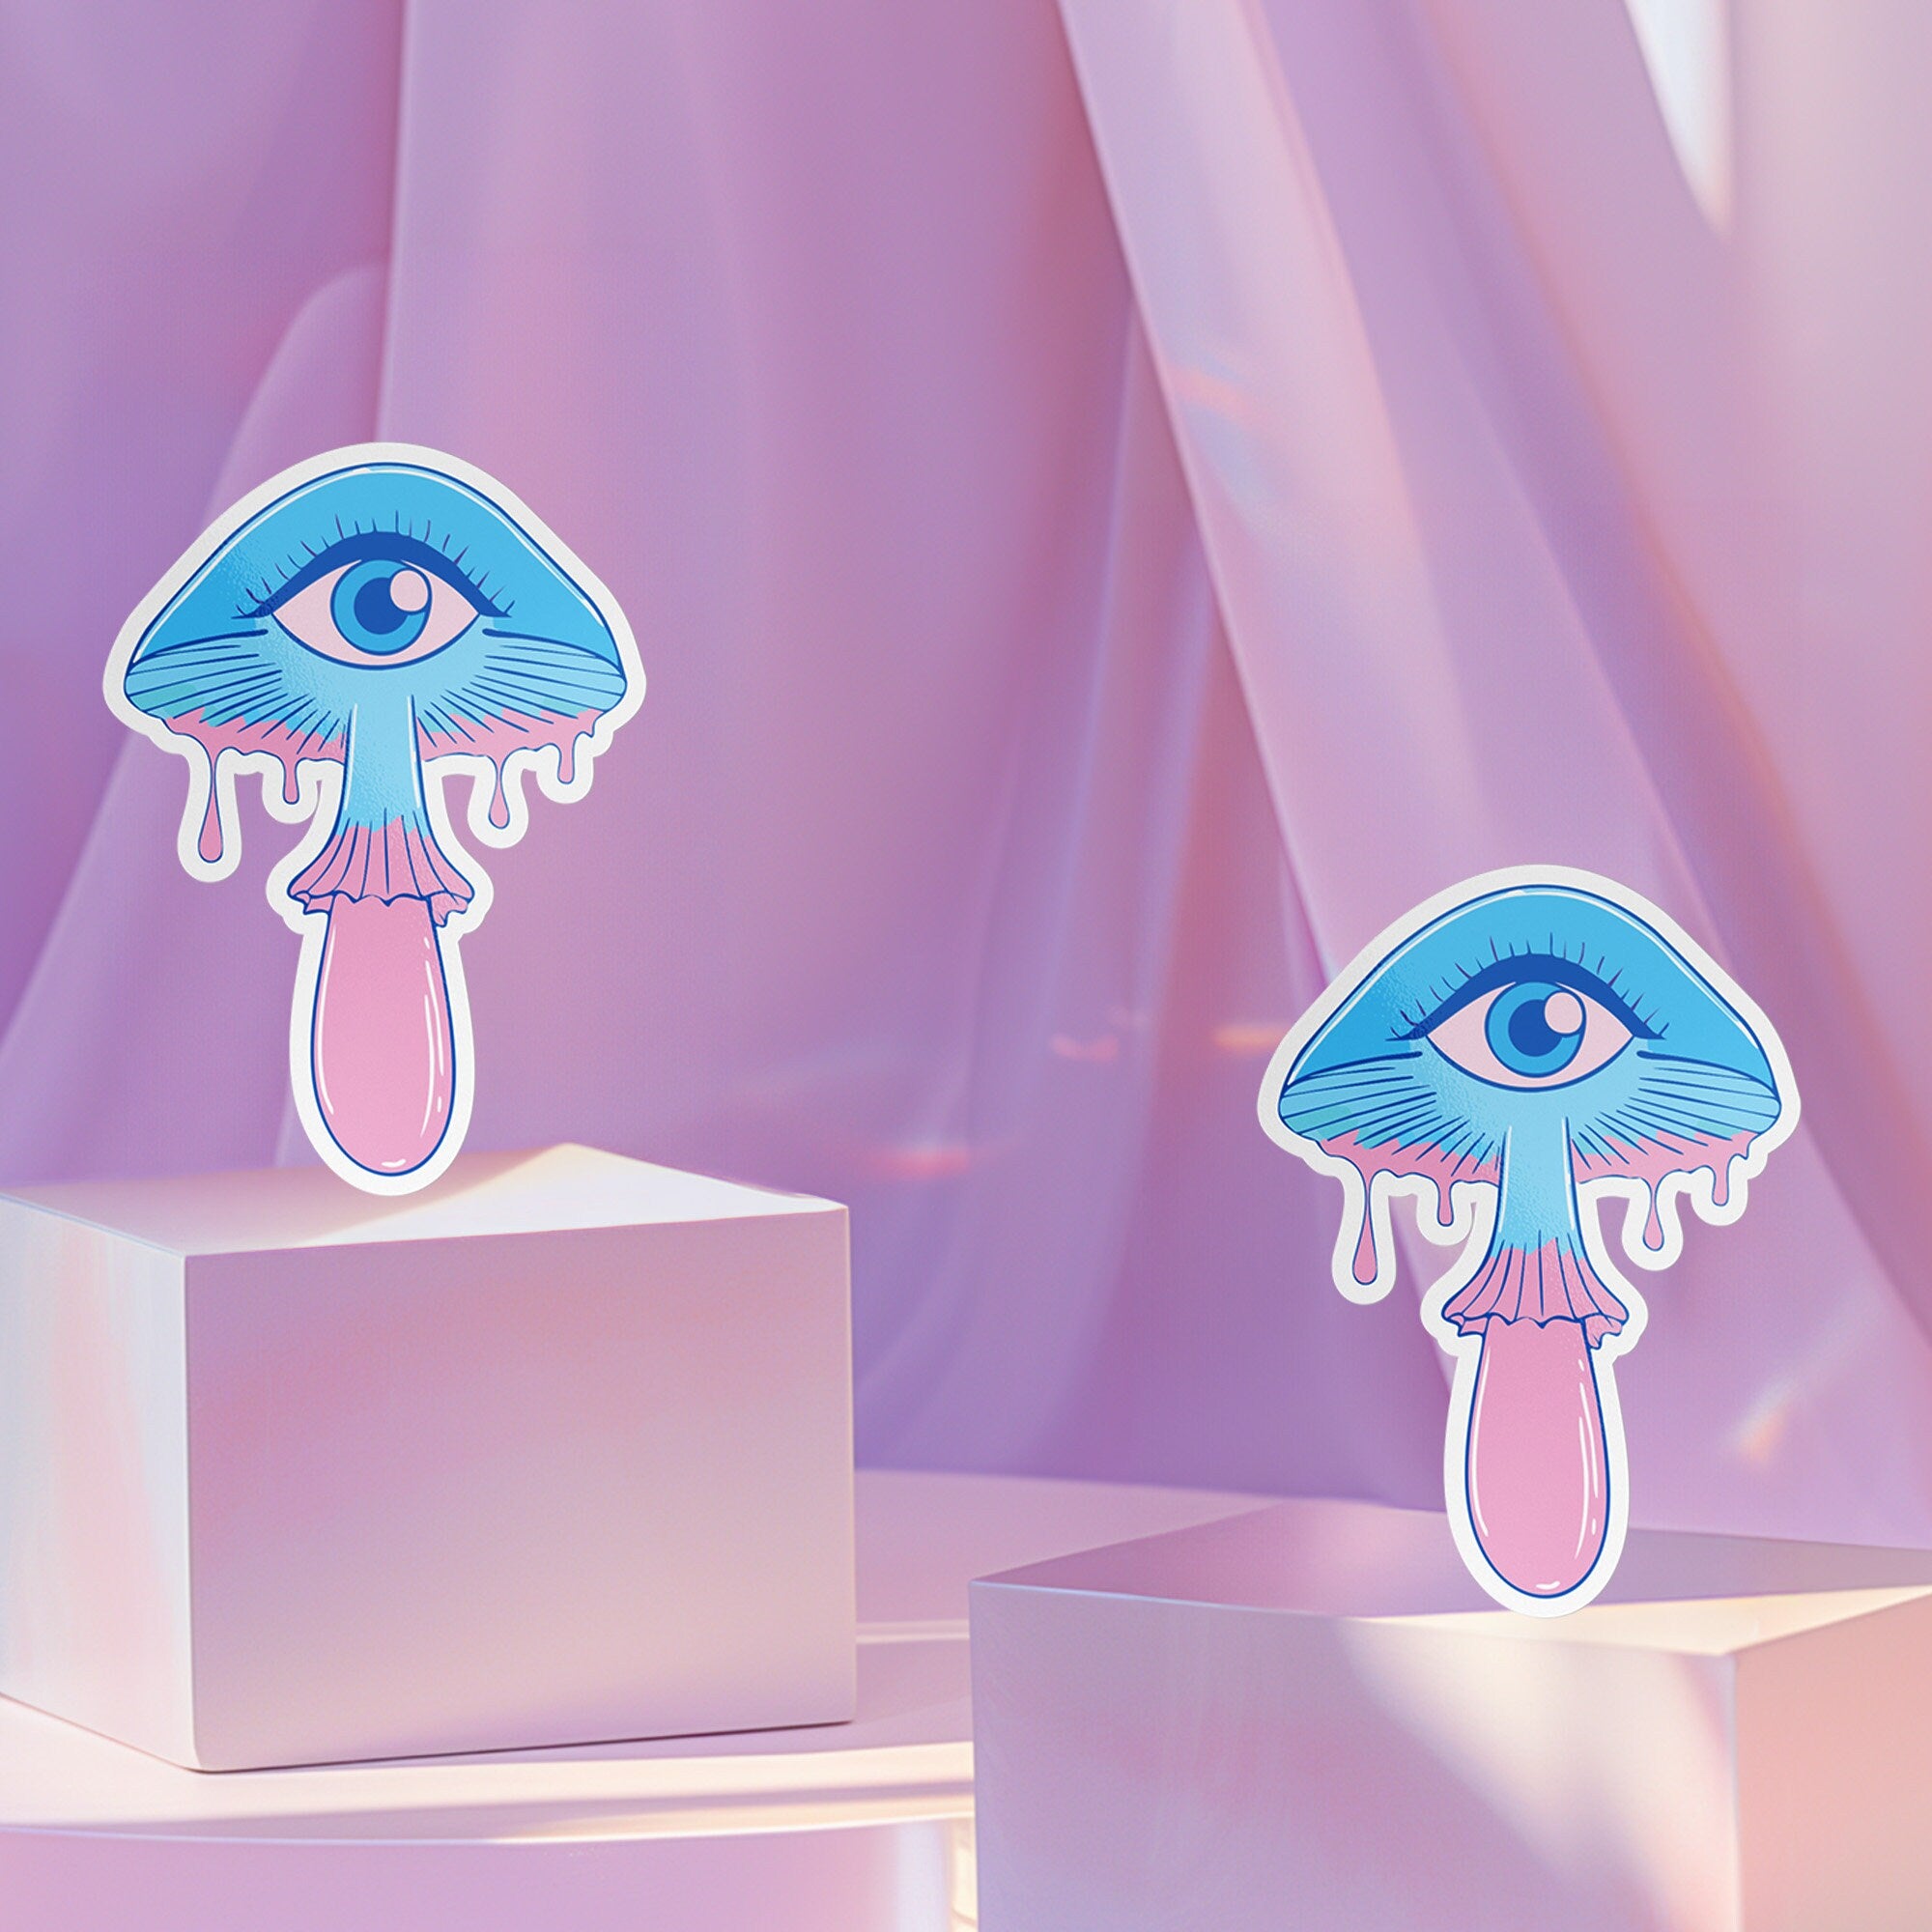 Surreal eyeball mushroom sticker in pastel colors, ideal for decorating laptops, phones, and water bottles. Available in Prism, Gem, and Glitter finishes. Handmade in Austin, Texas.